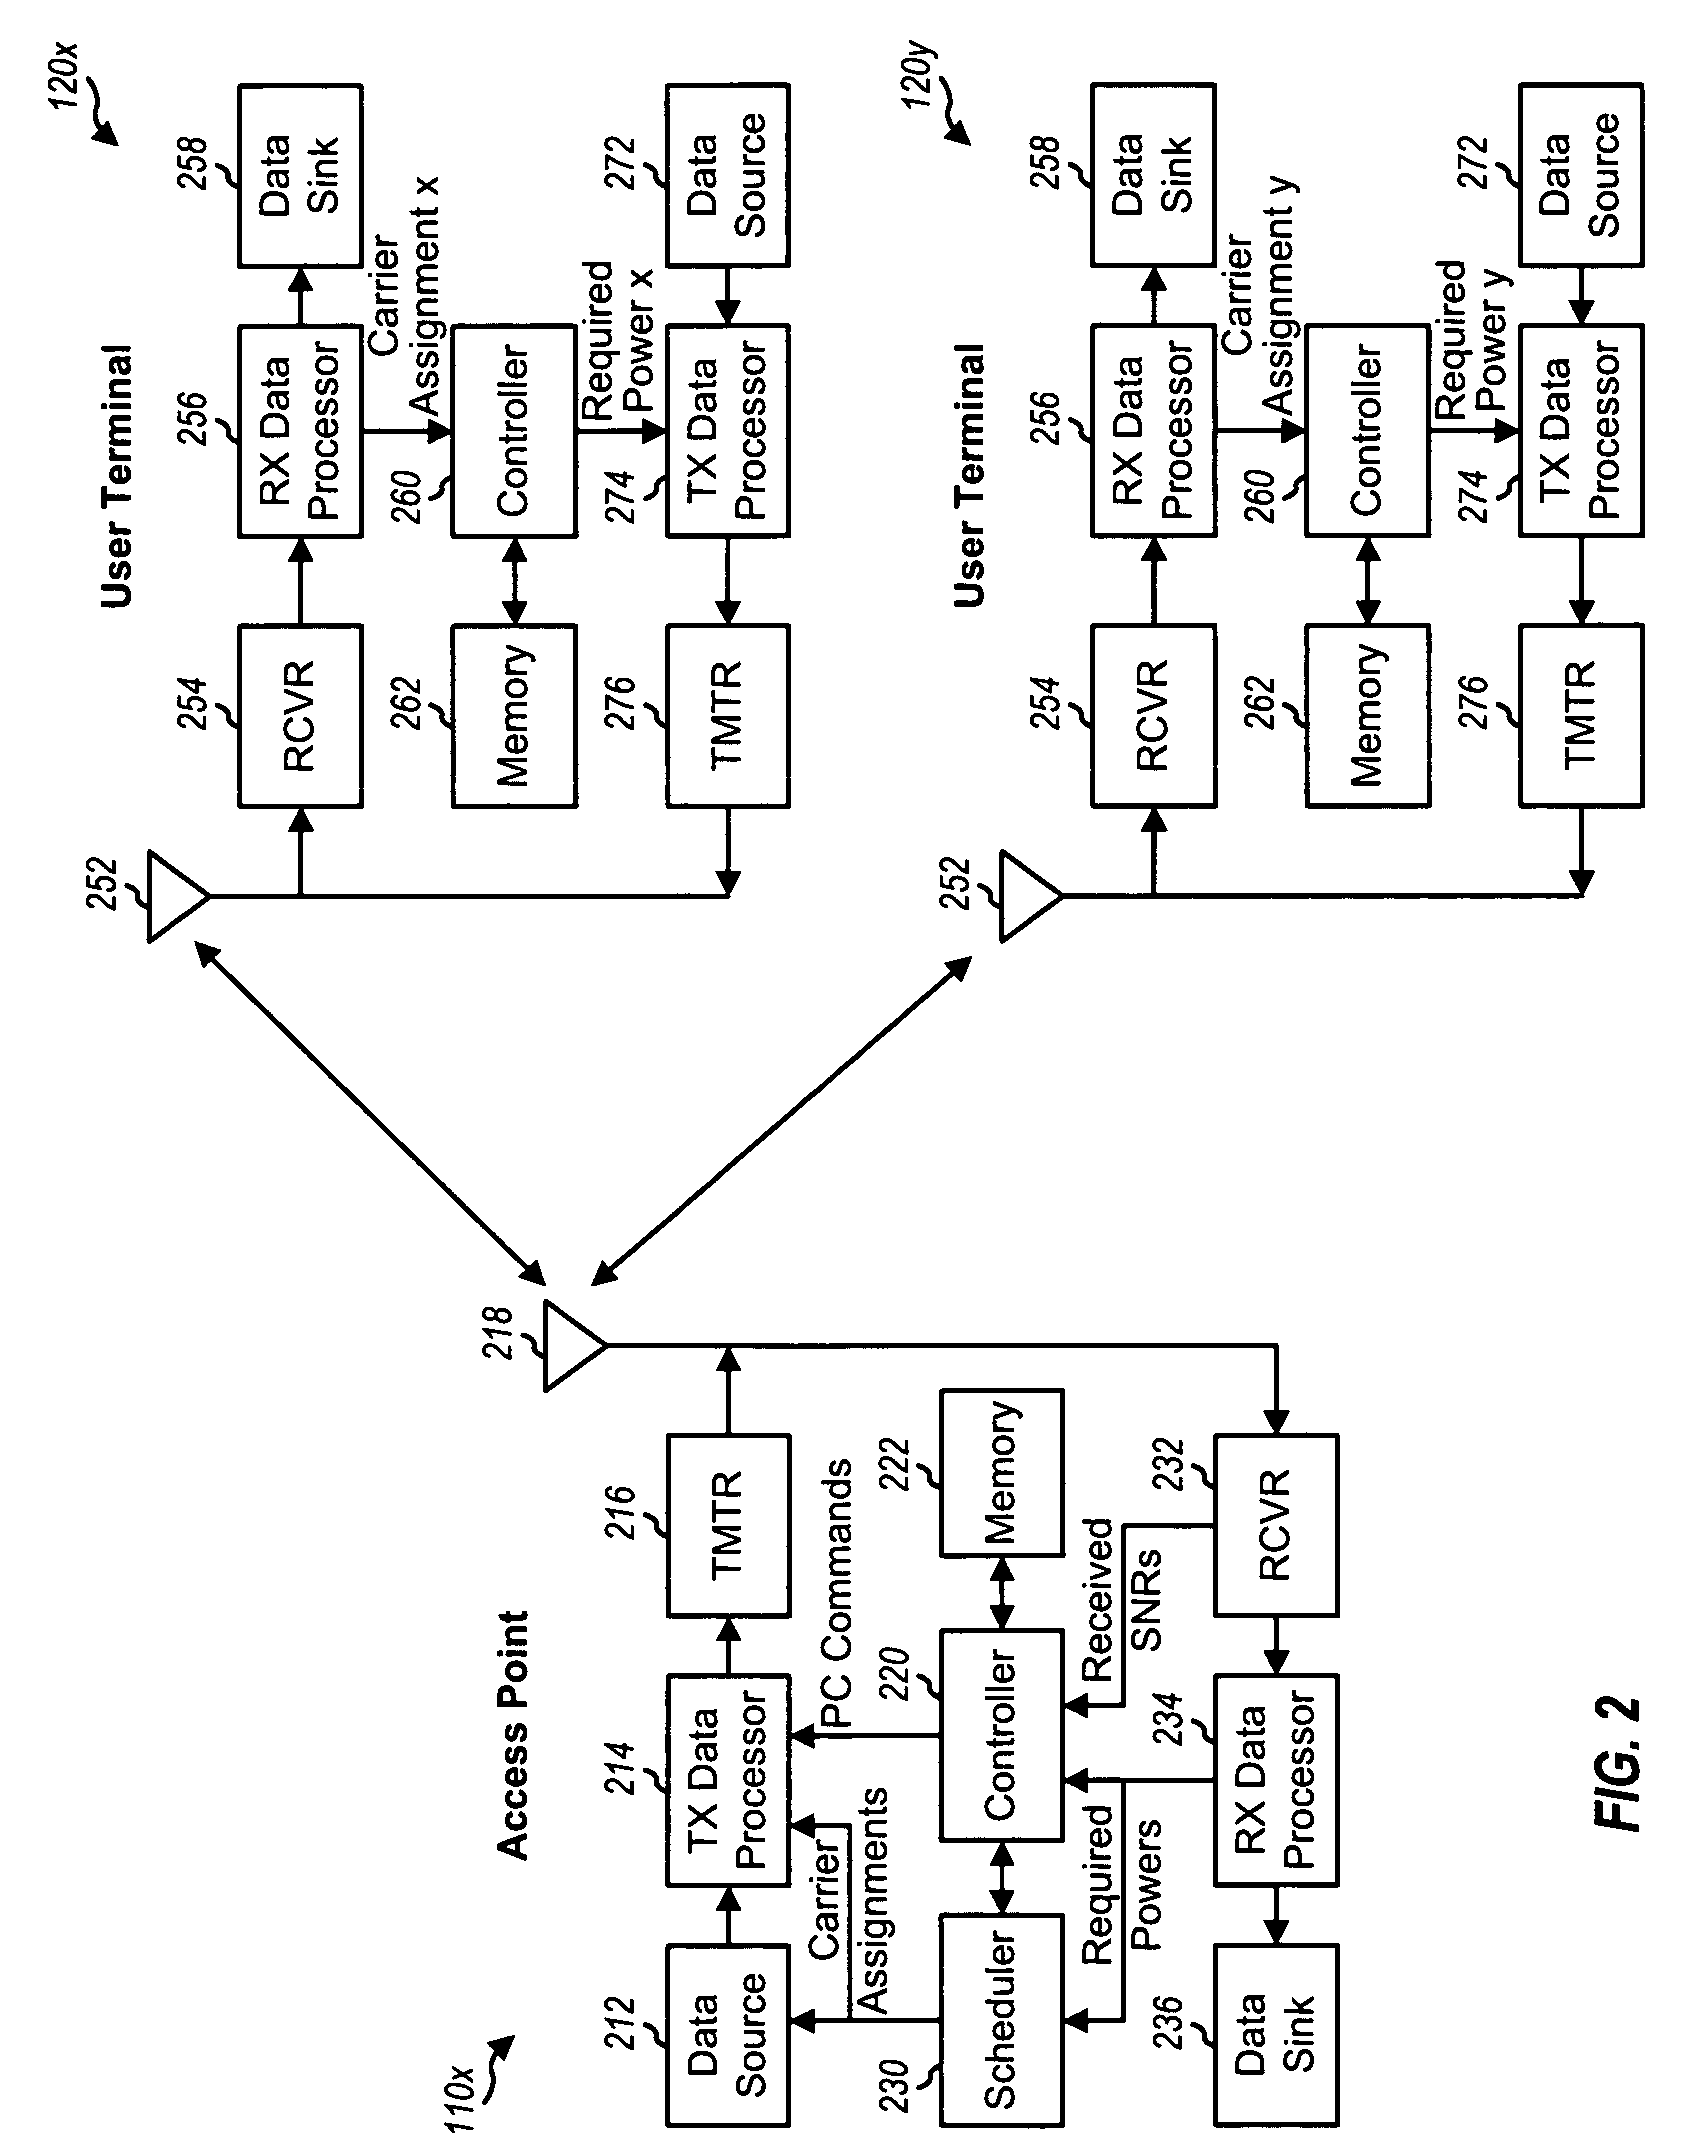 Method and apparatus of using a single channel to provide acknowledgement and assignment messages